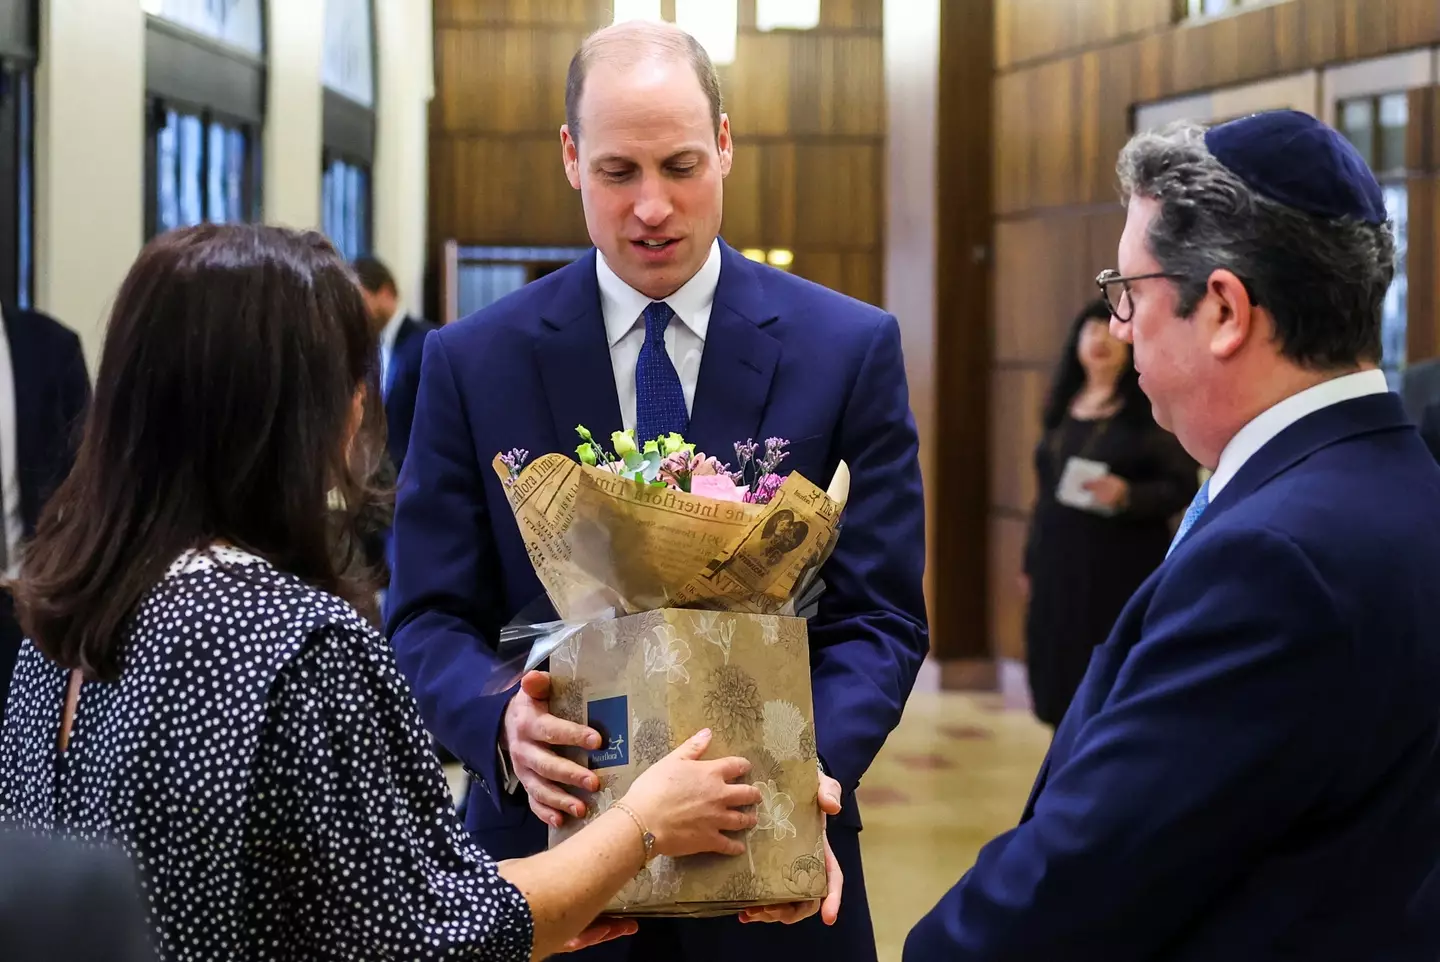 Prince William returned to royal duties today, and was presented with flowers for his wife.